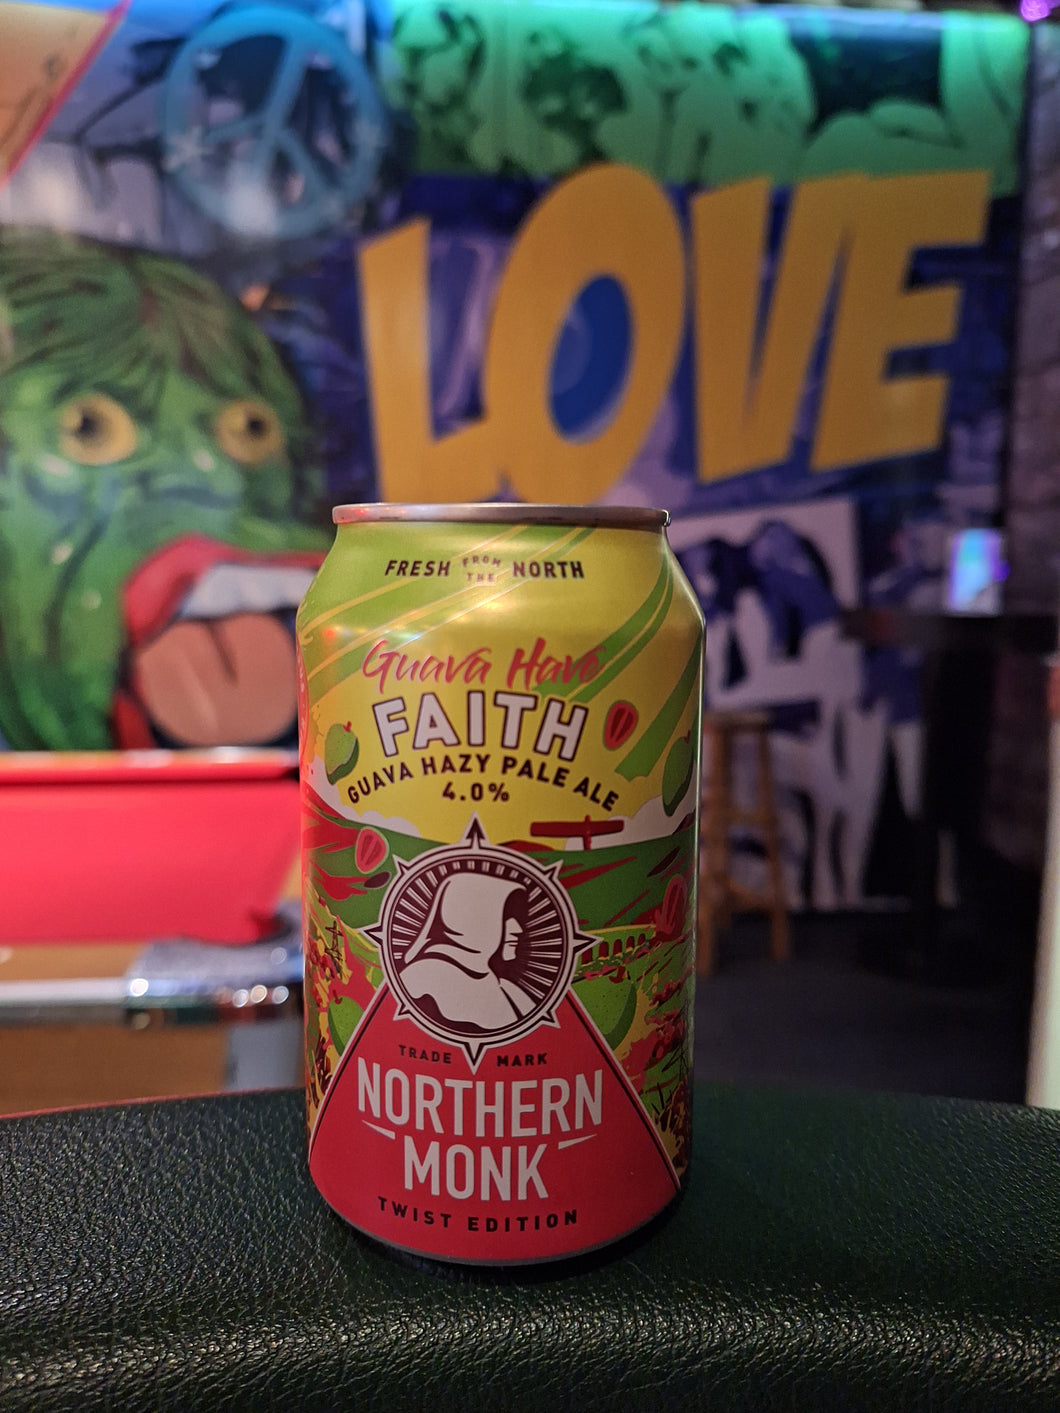 Northern Monk Guava Have Faith